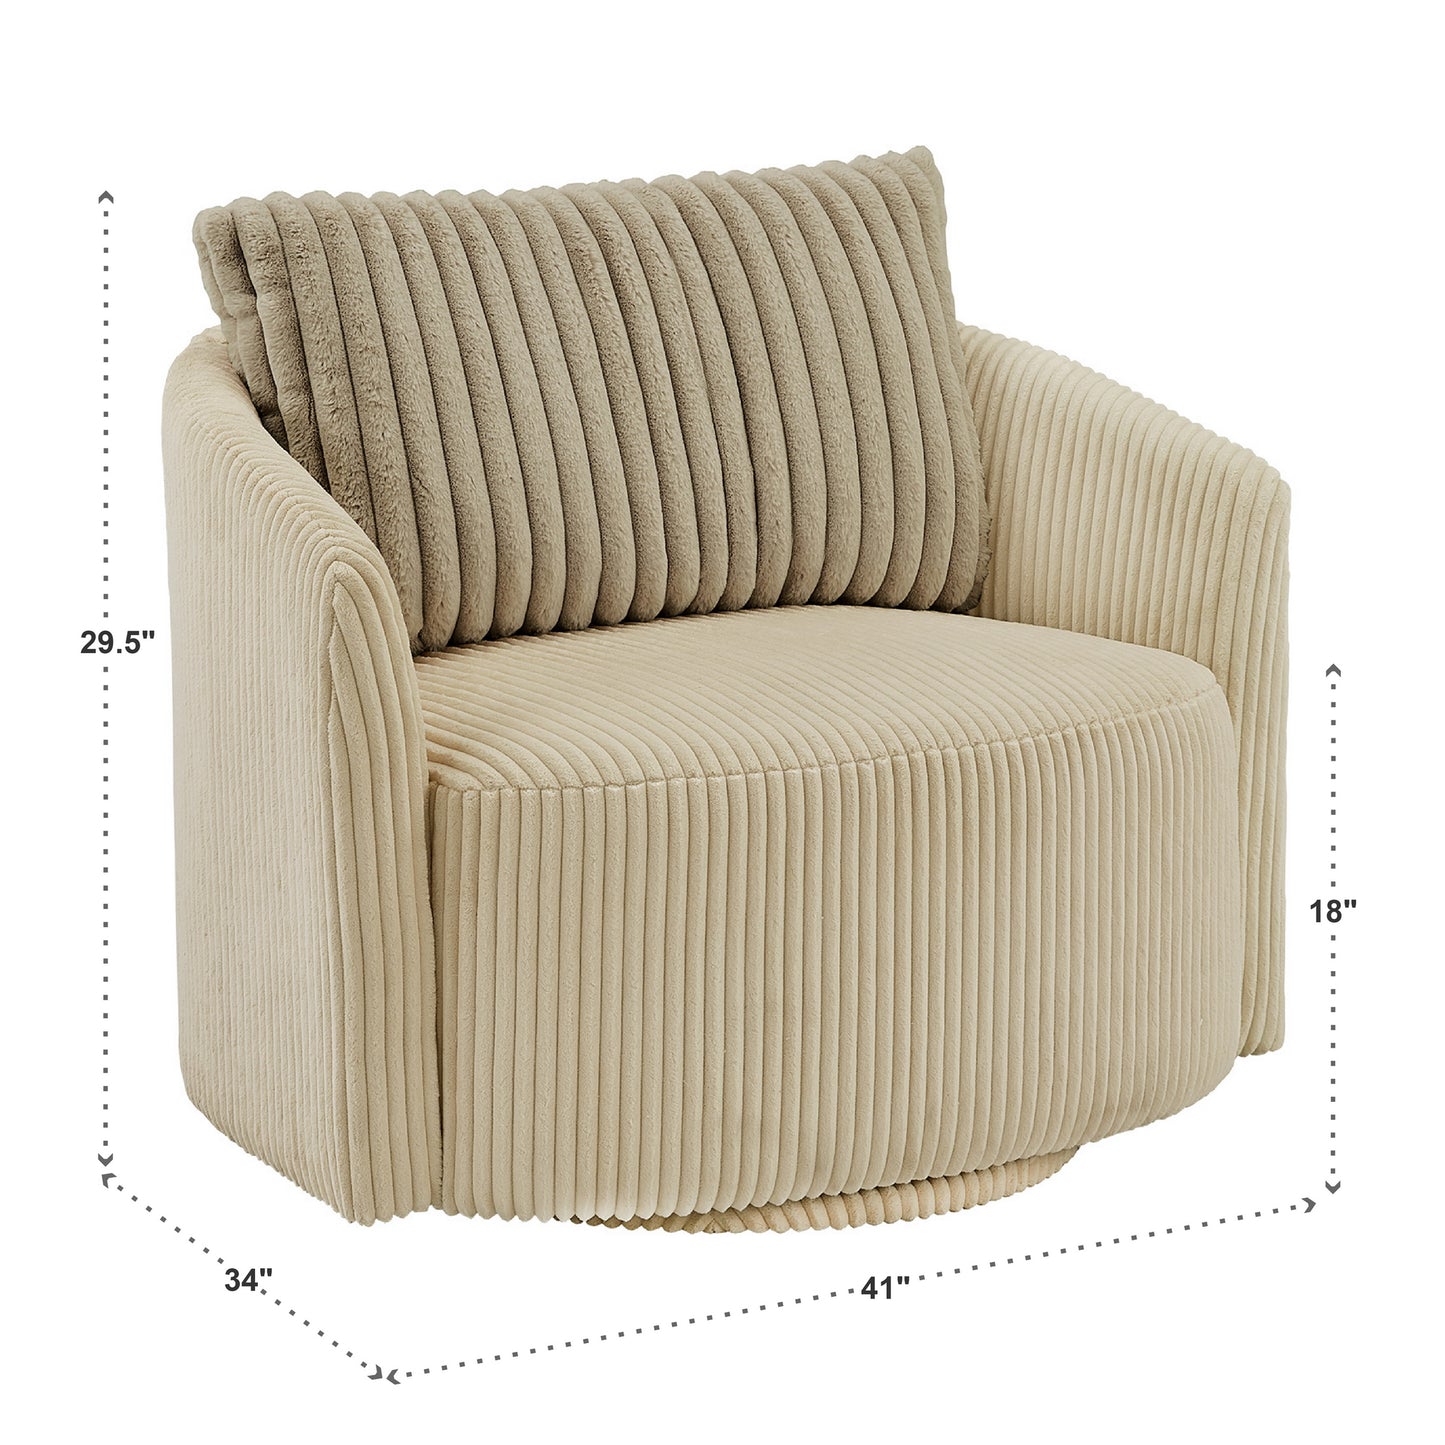 Oversized Wale Corduroy Swivel Accent Chair with Furry Channel Pillow - Beige Chair, Taupe Pillow